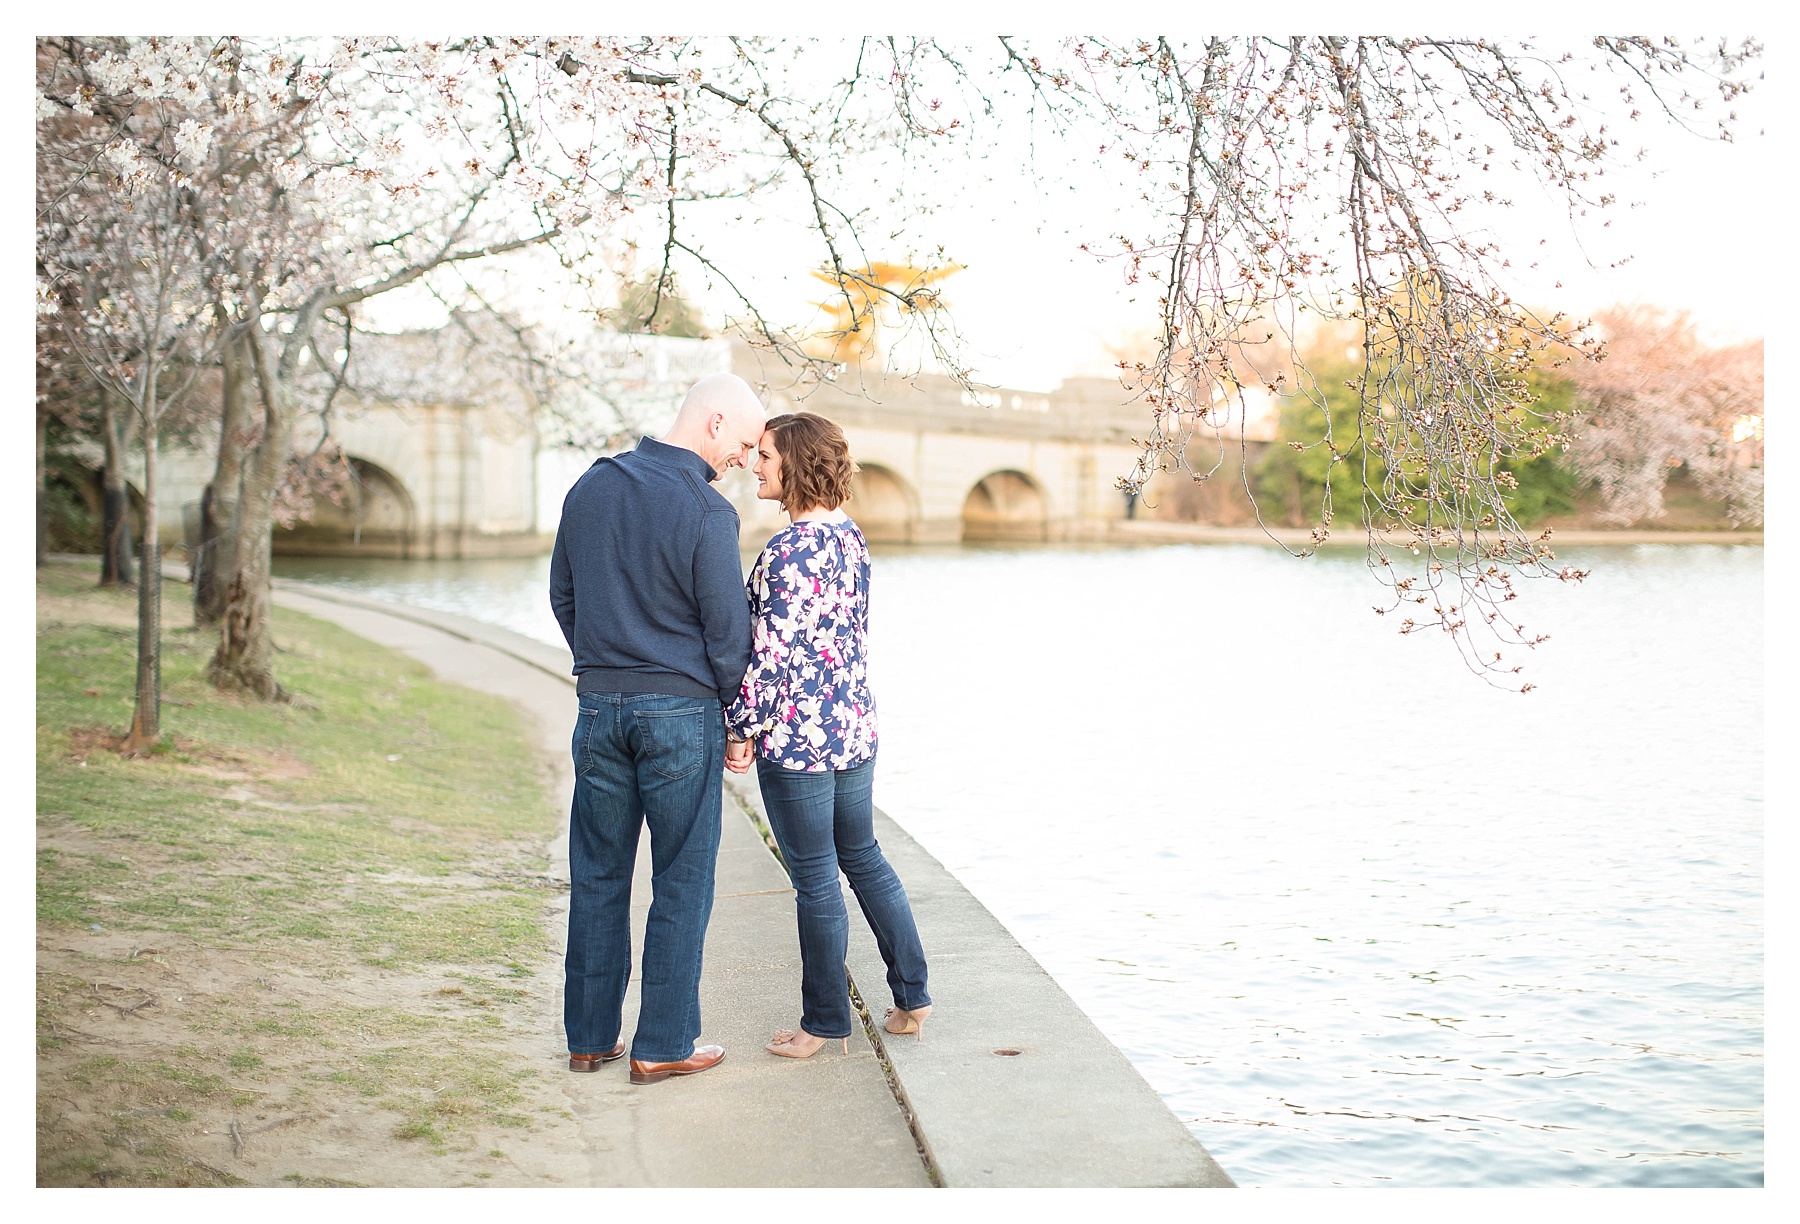 Candice Adelle Photography DC Destination Wedding Photographer Cherry Blossom Engagment Session_0010.jpg